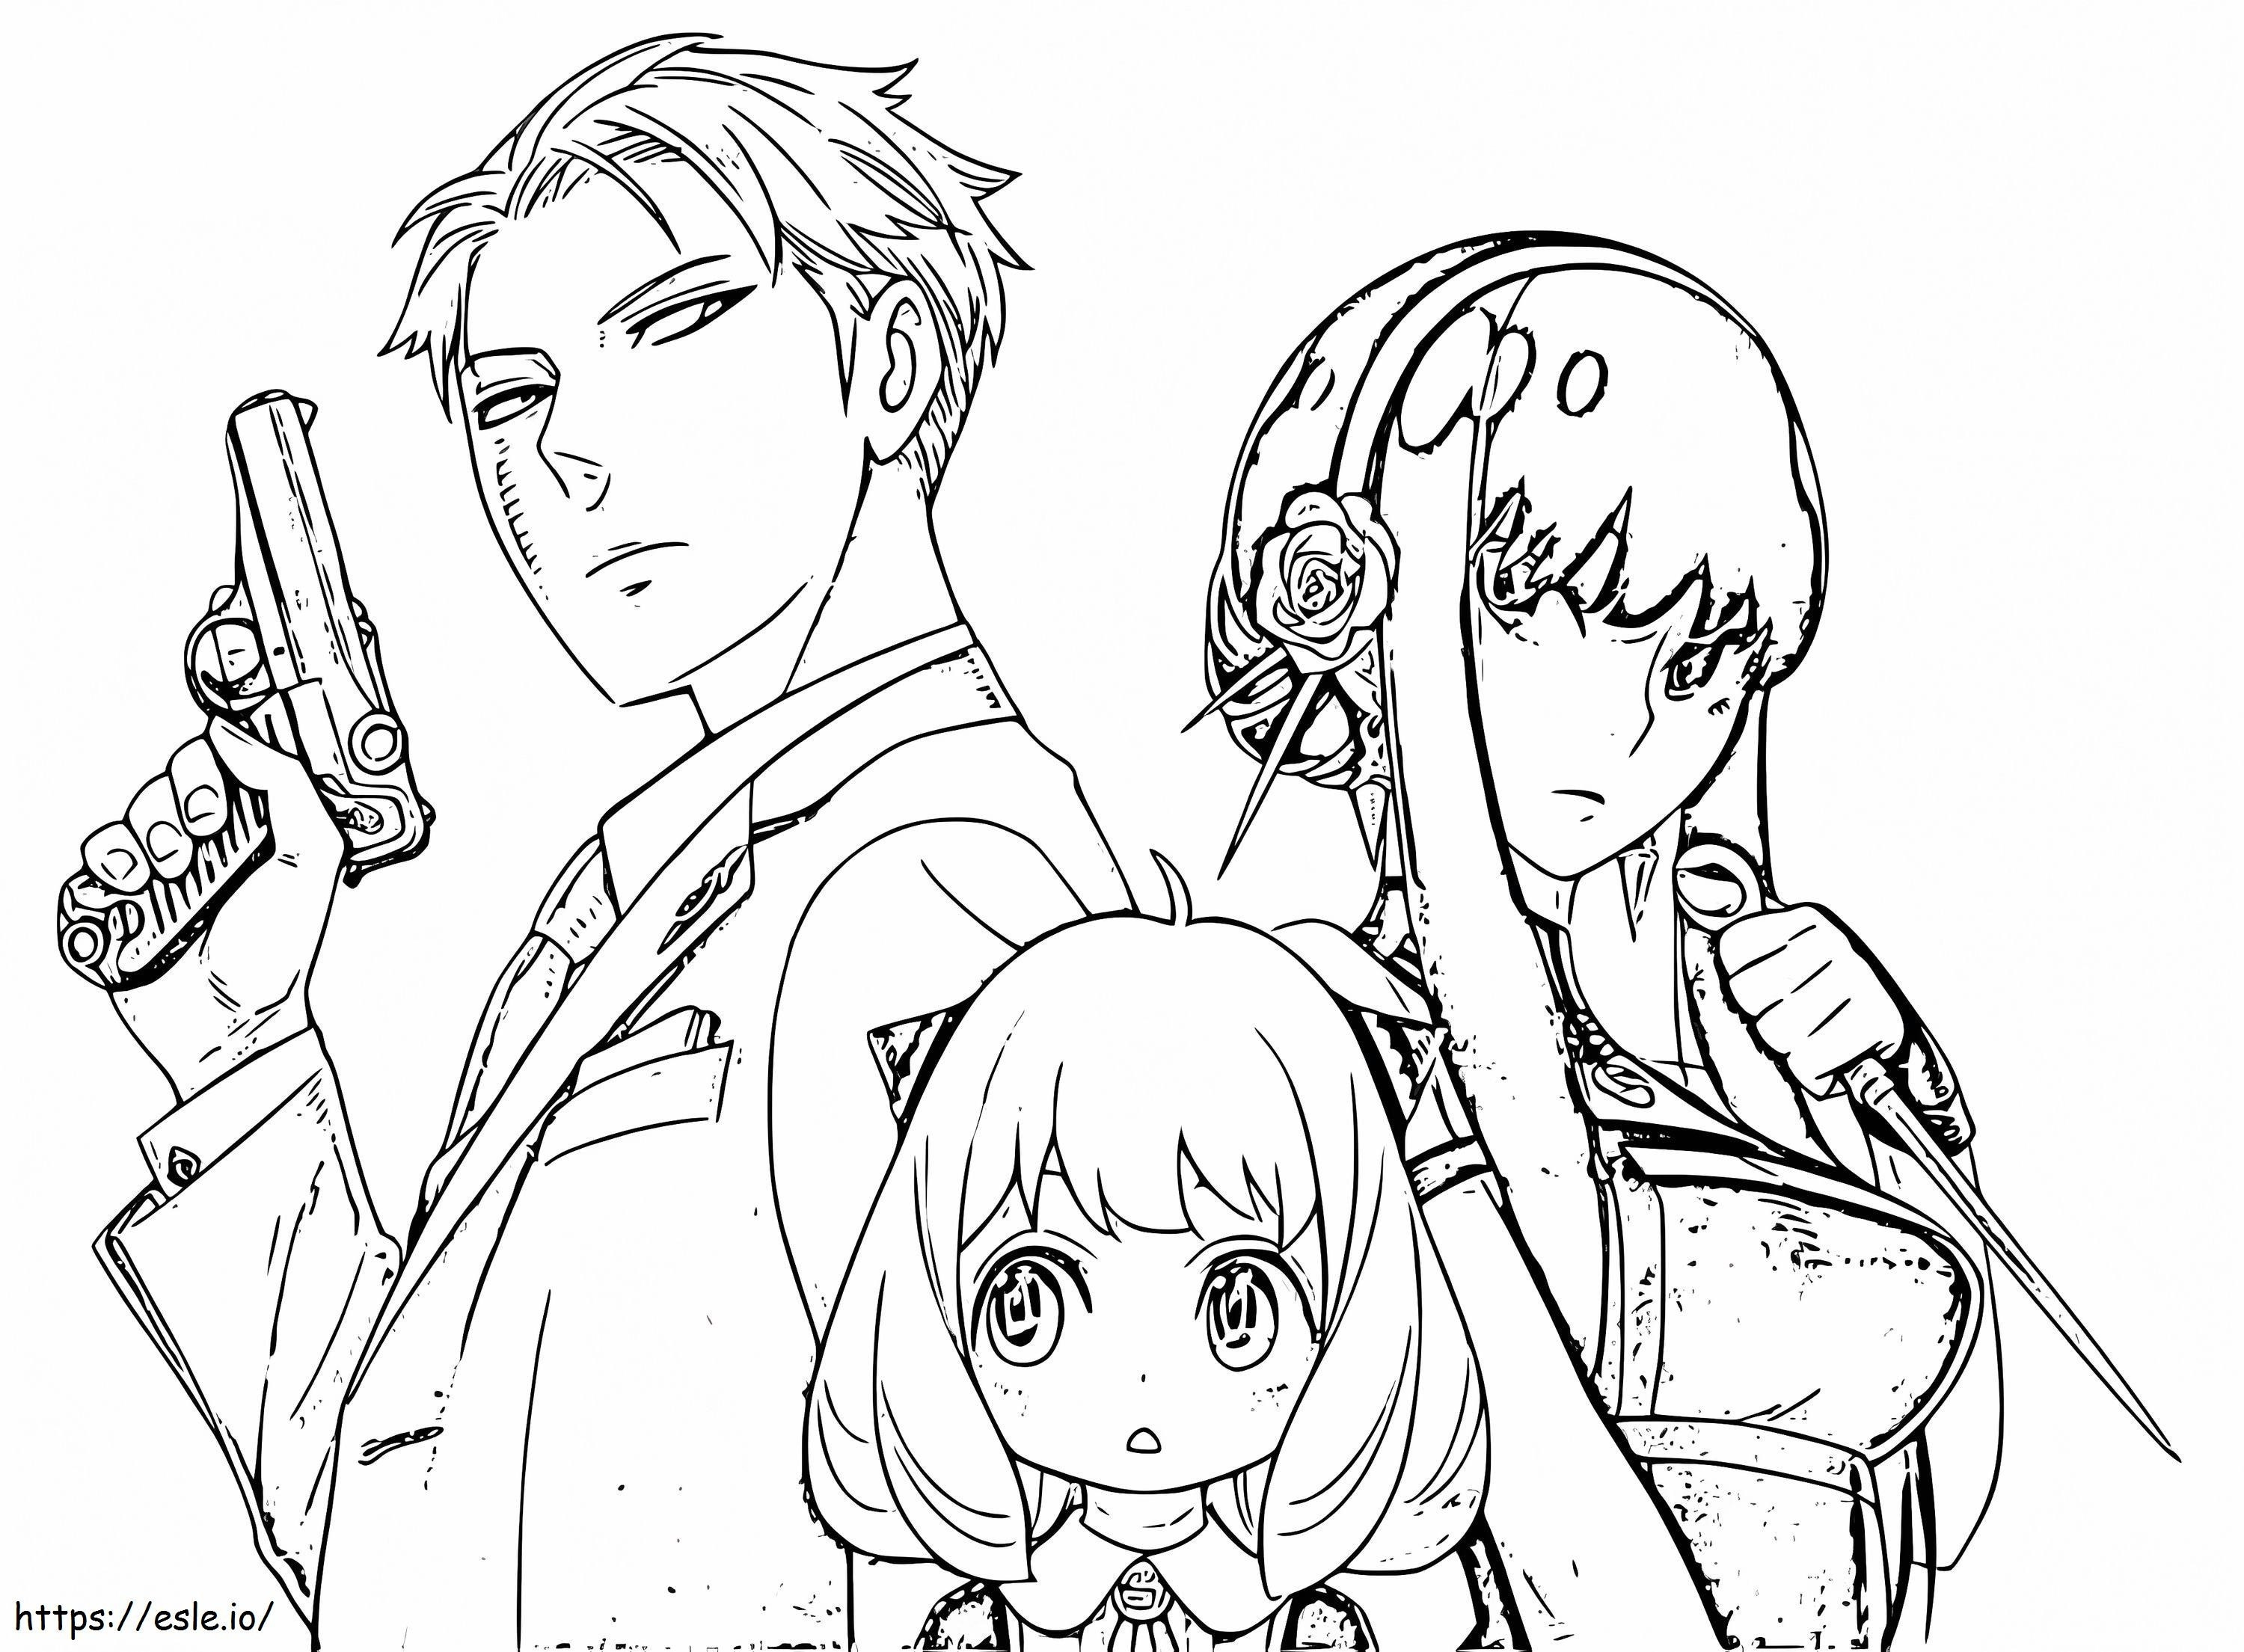 Spy X Family 1 coloring page